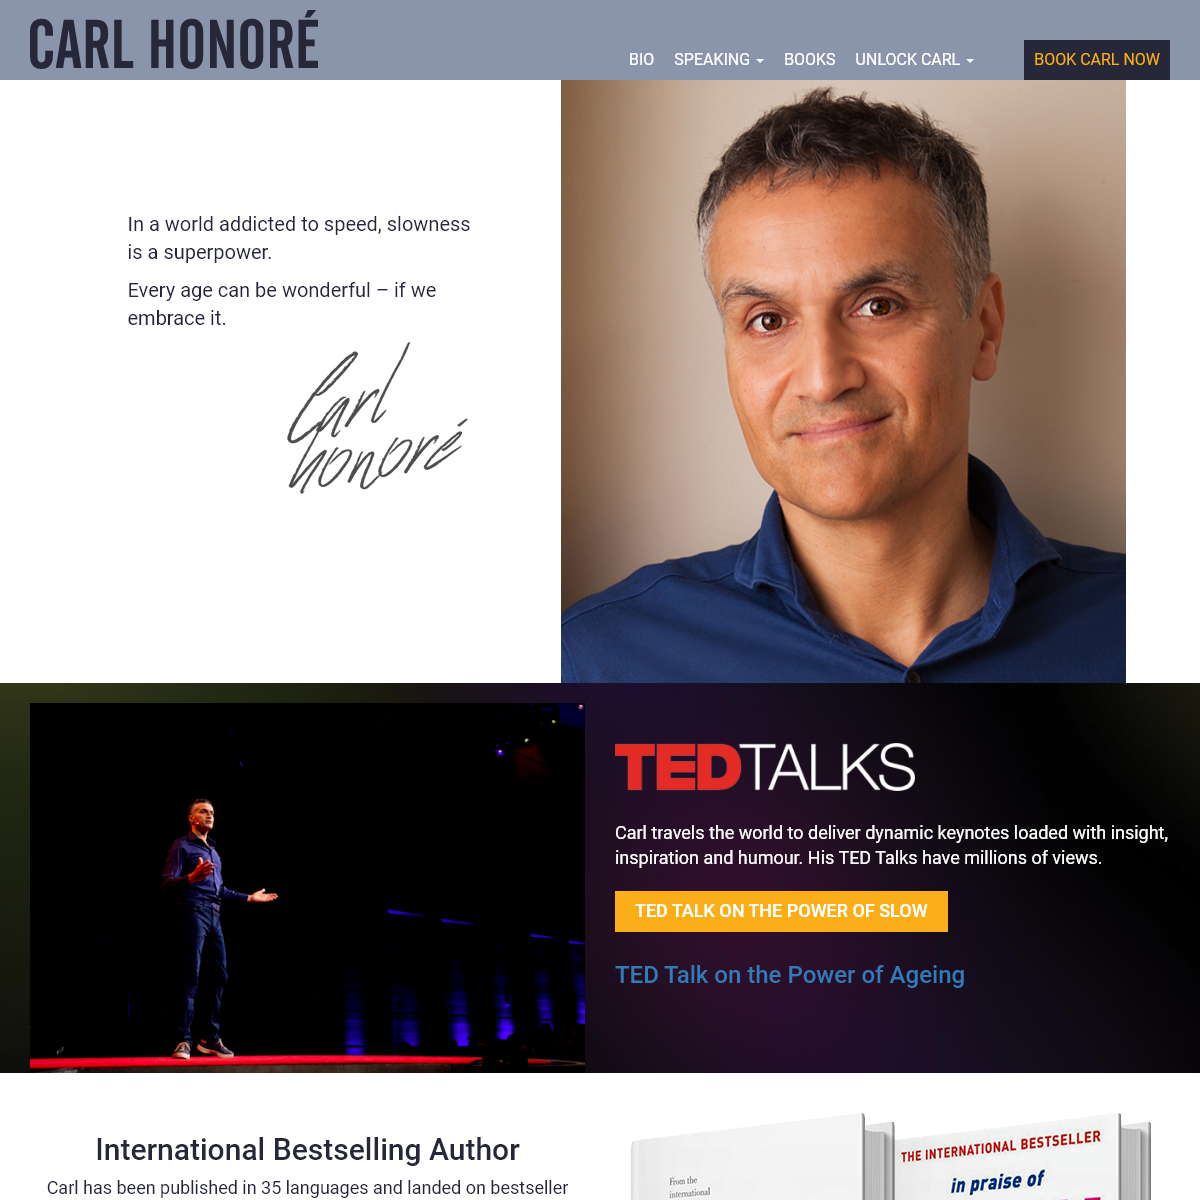 A complete backup of carlhonore.com